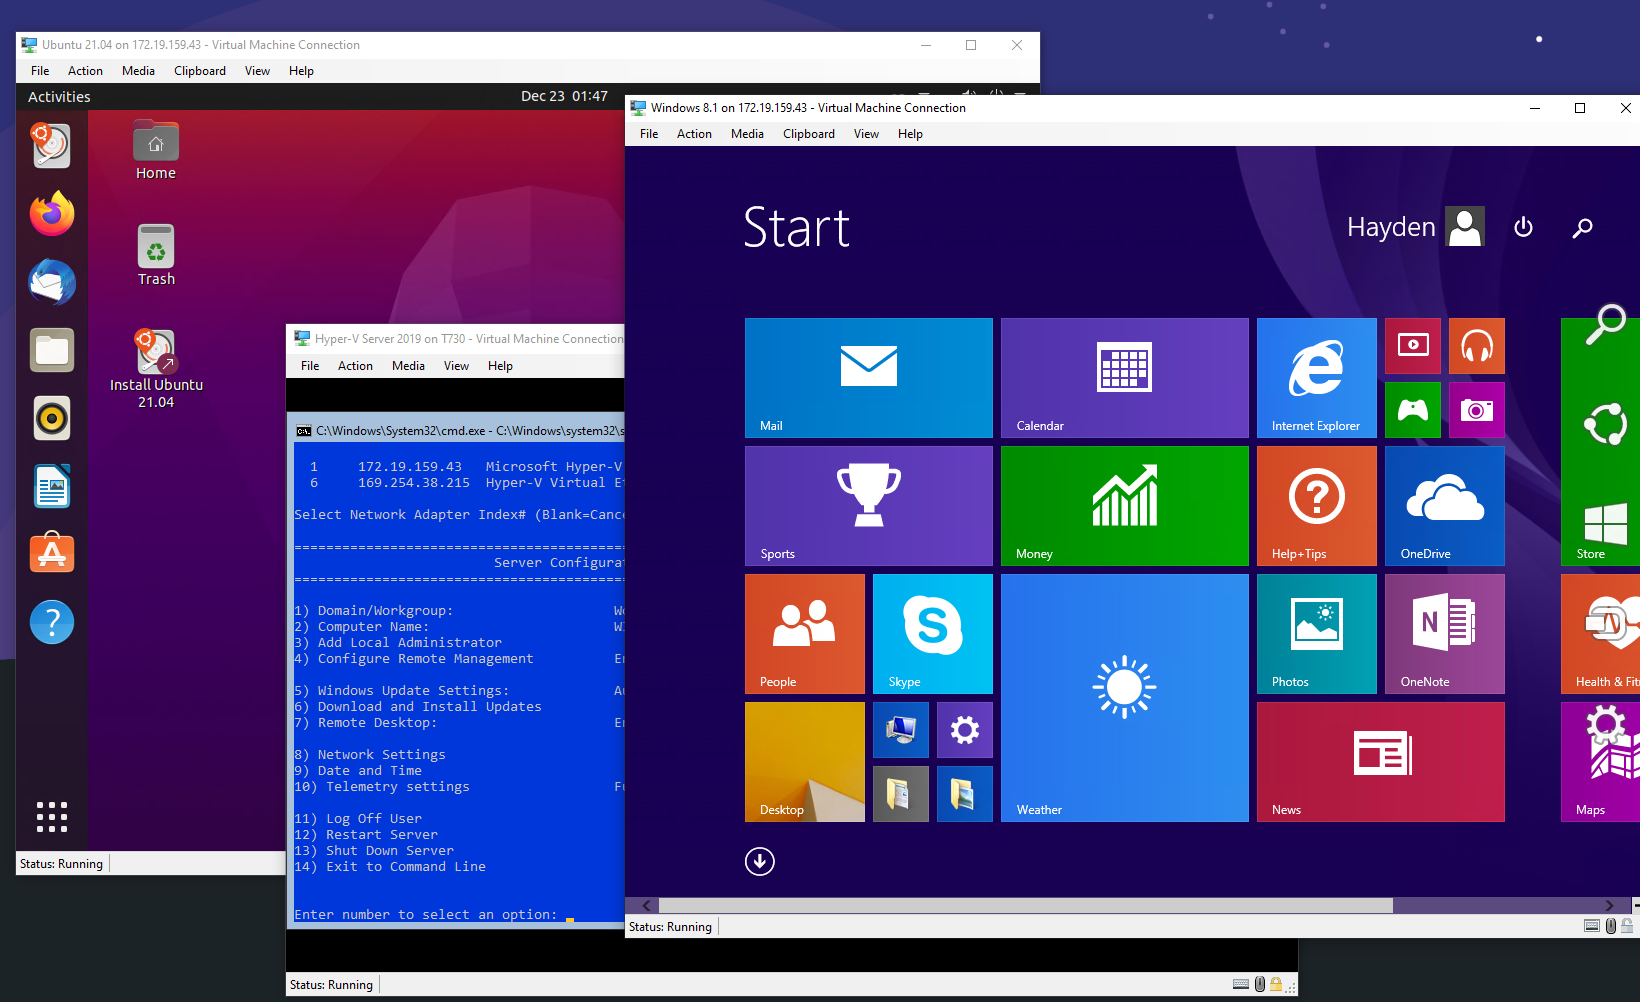 linux virtualization software for windows 10